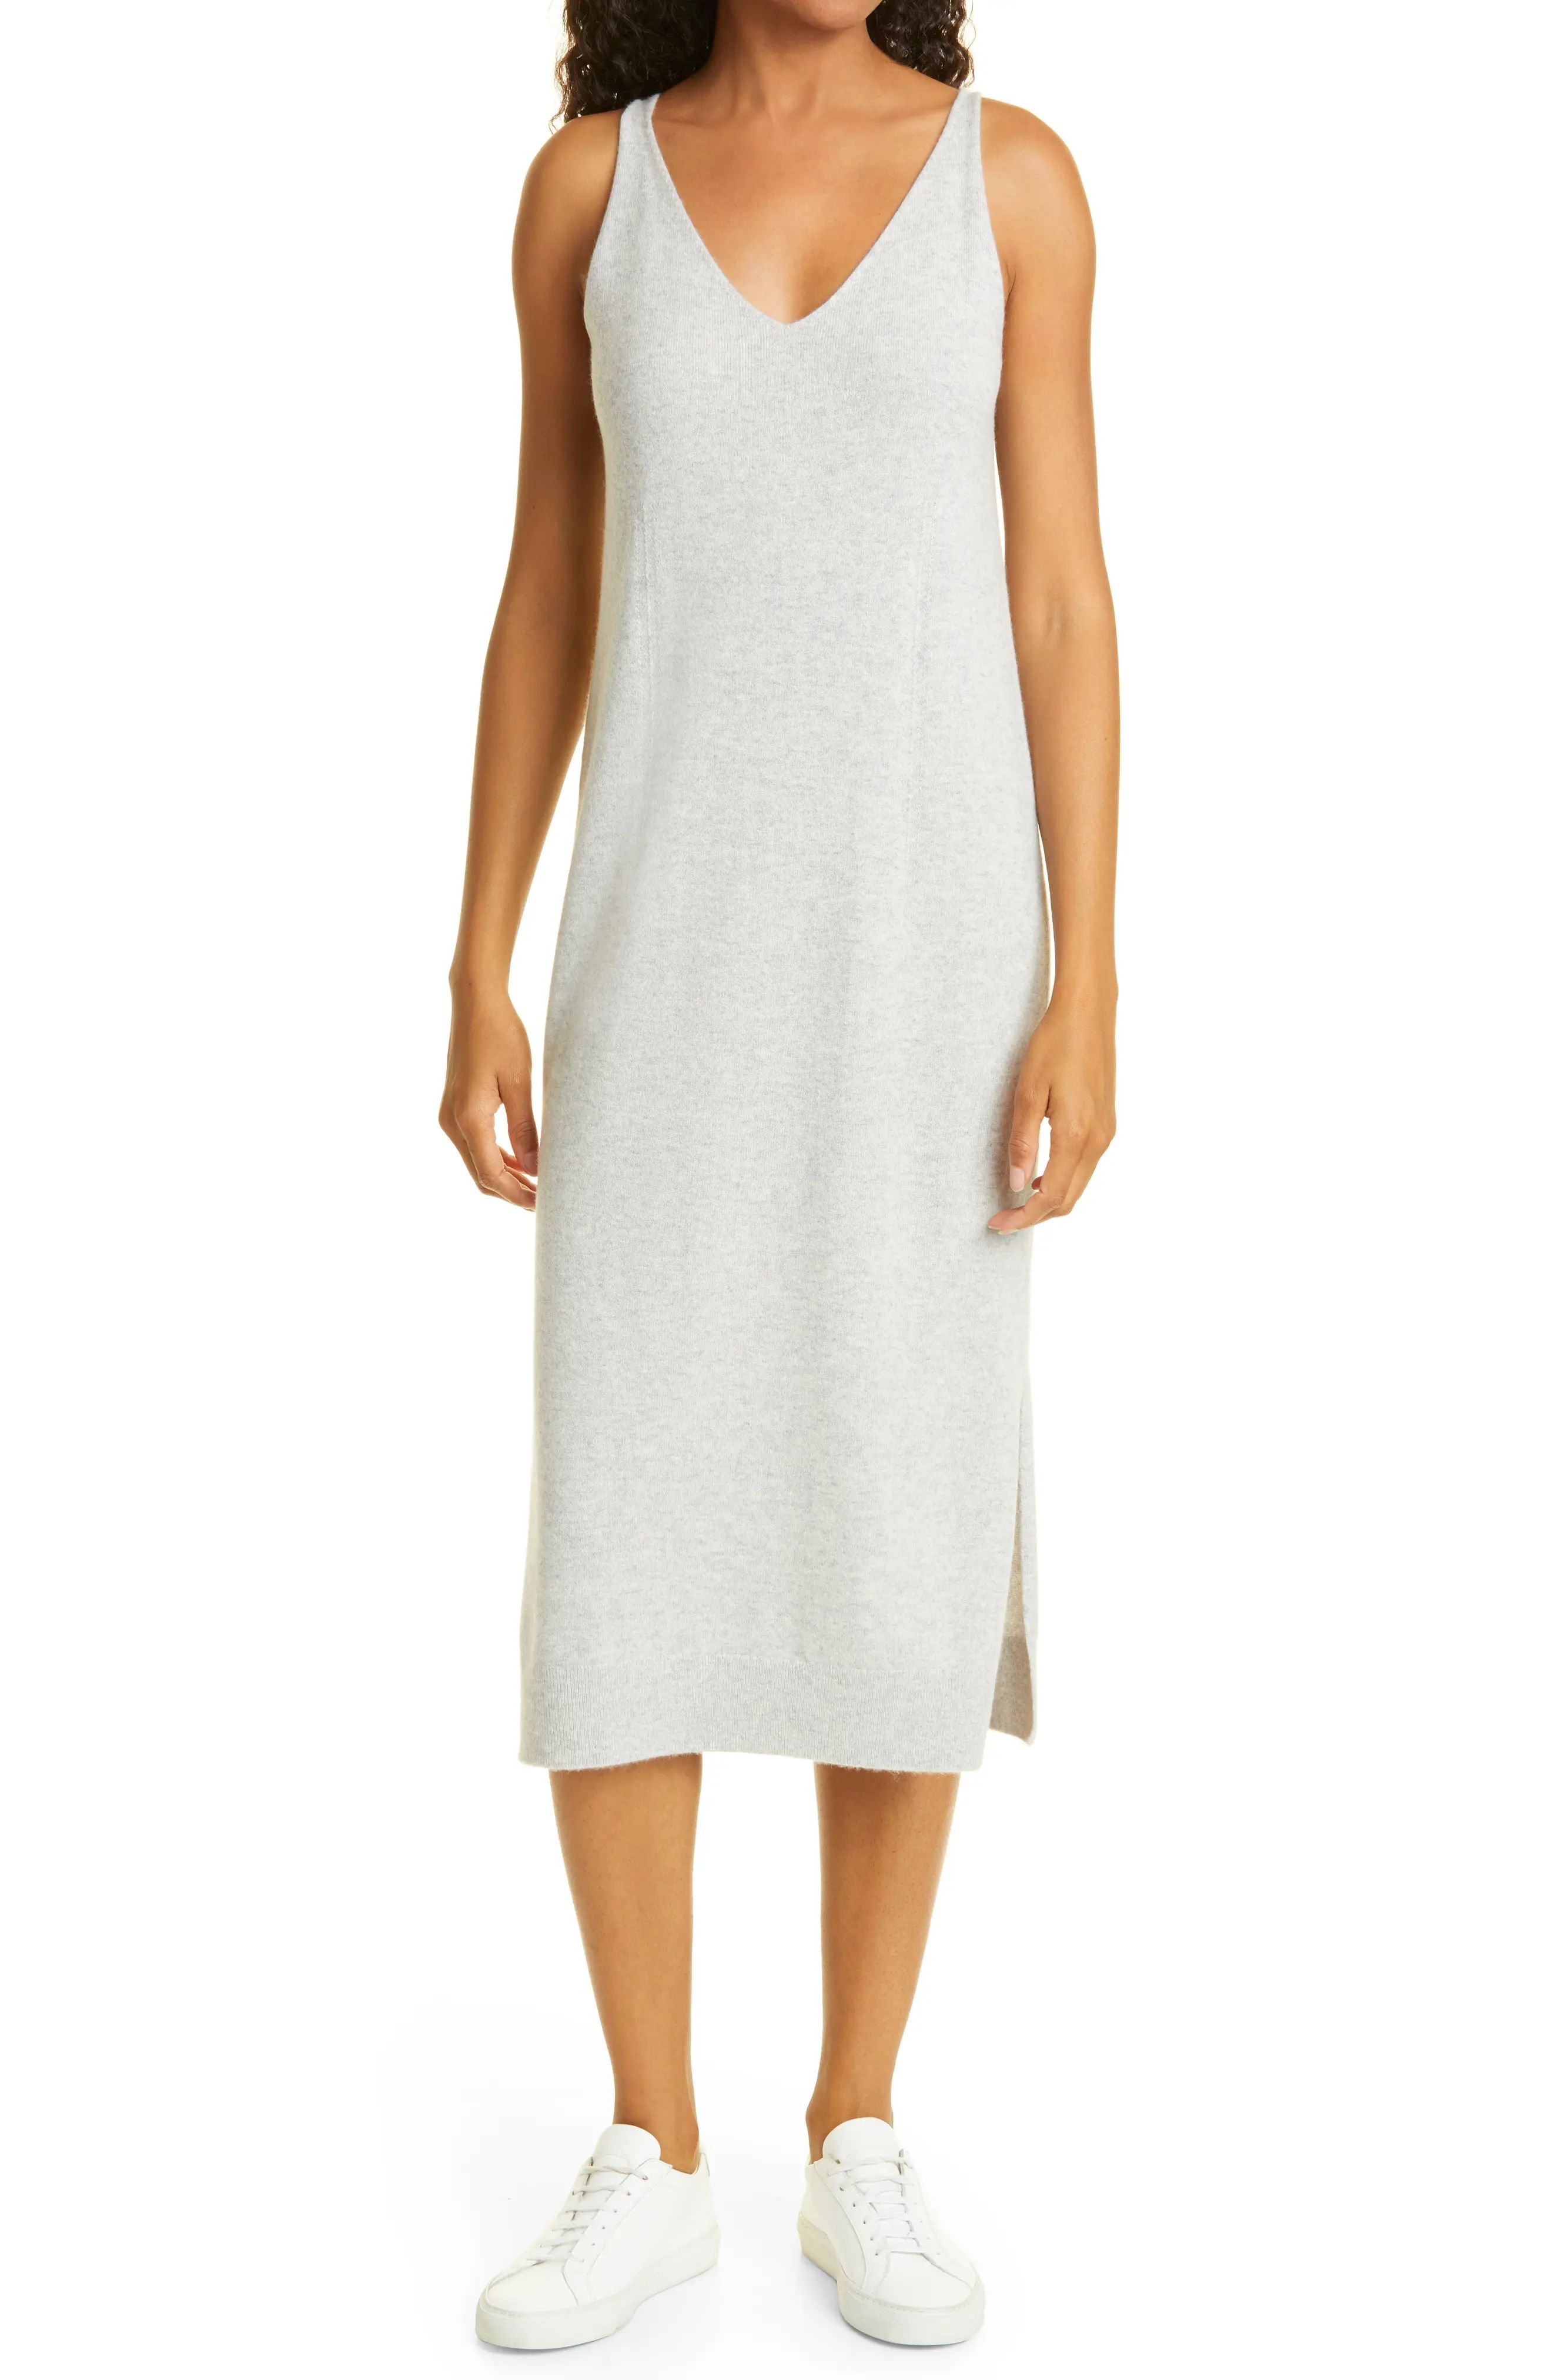 Club Monaco Signature Recycled Cashmere Midi Sweater Dress, Size Xx-Small in Light Heather Grey at N | Nordstrom